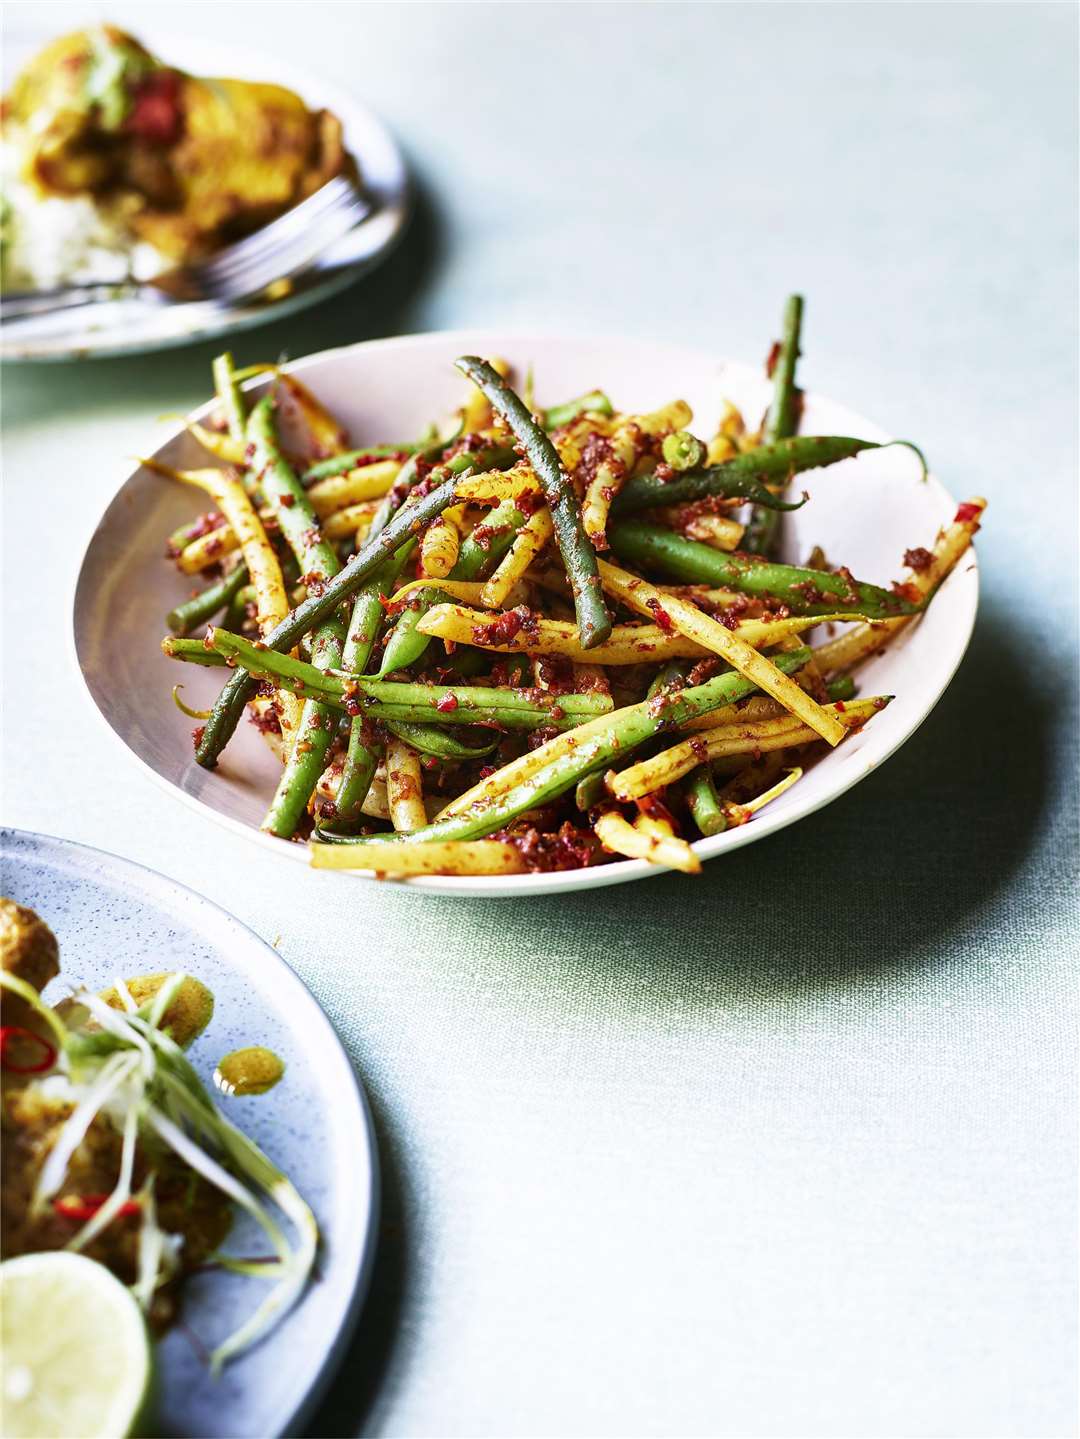 Spicy green beans with chilli and garlic. Picture: Kris Kirkham/PA